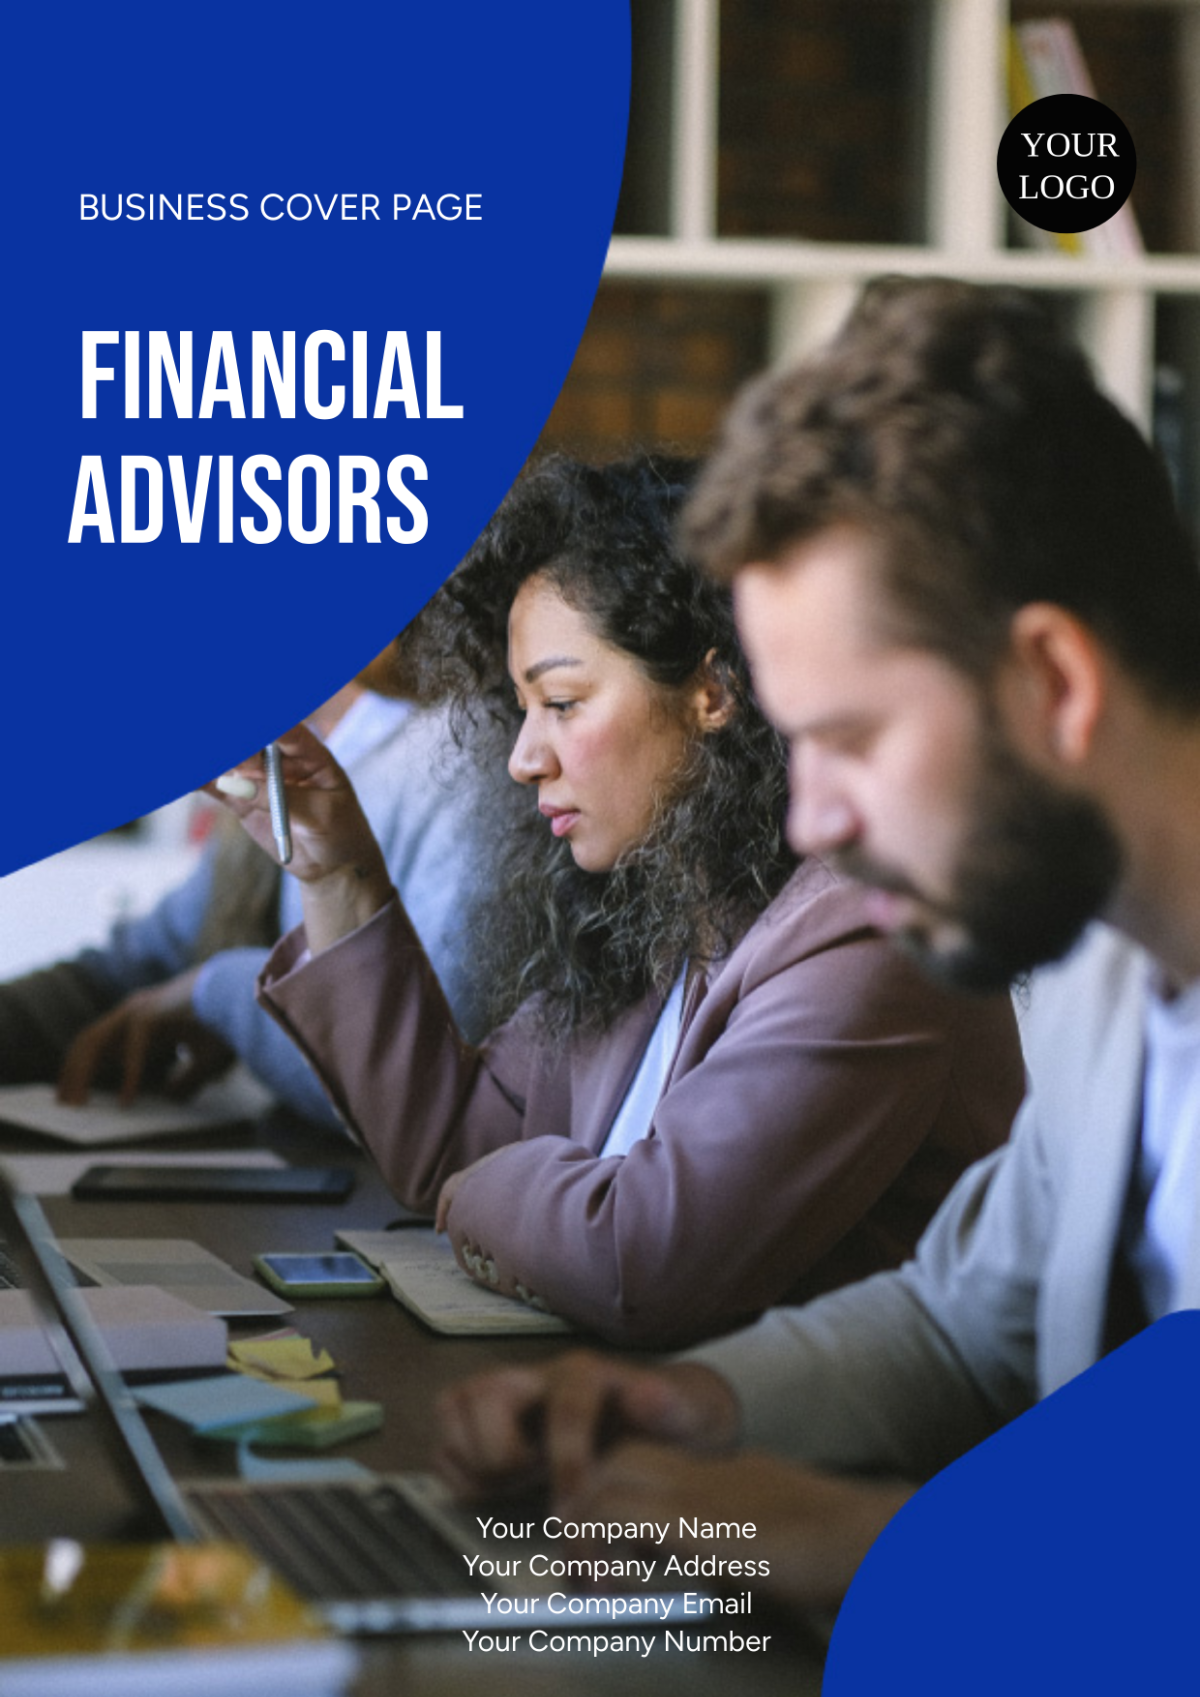 Financial Advisors Business Cover Page